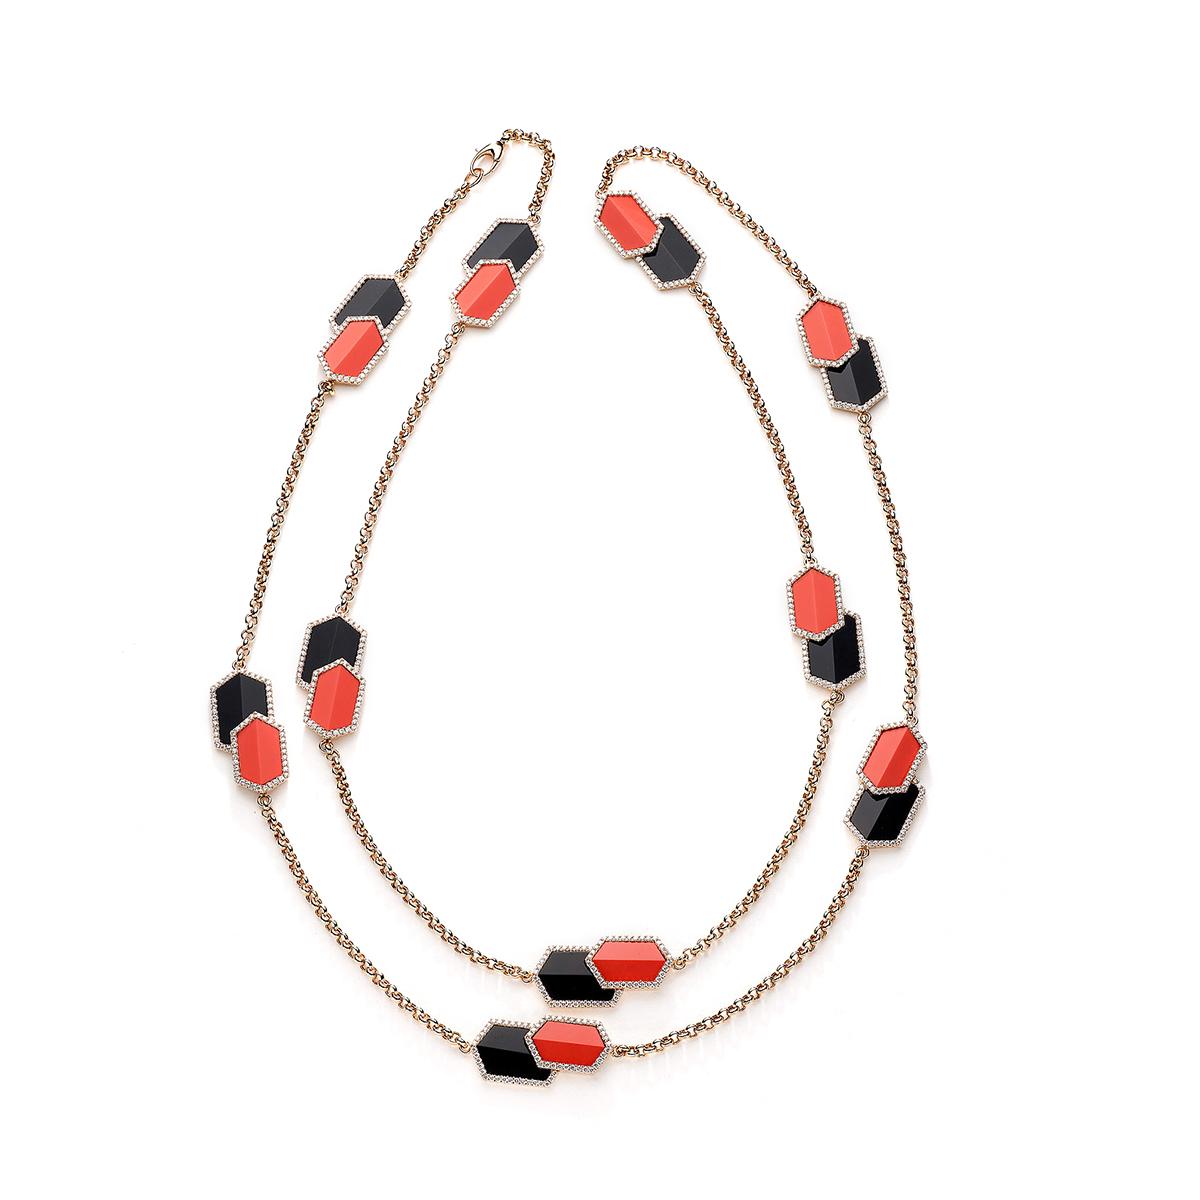 Necklace in 18kt pink gold set with 640 diamonds 4.84 cts, 10 onyx 24.23 cts and 10 coral 28.90 cts